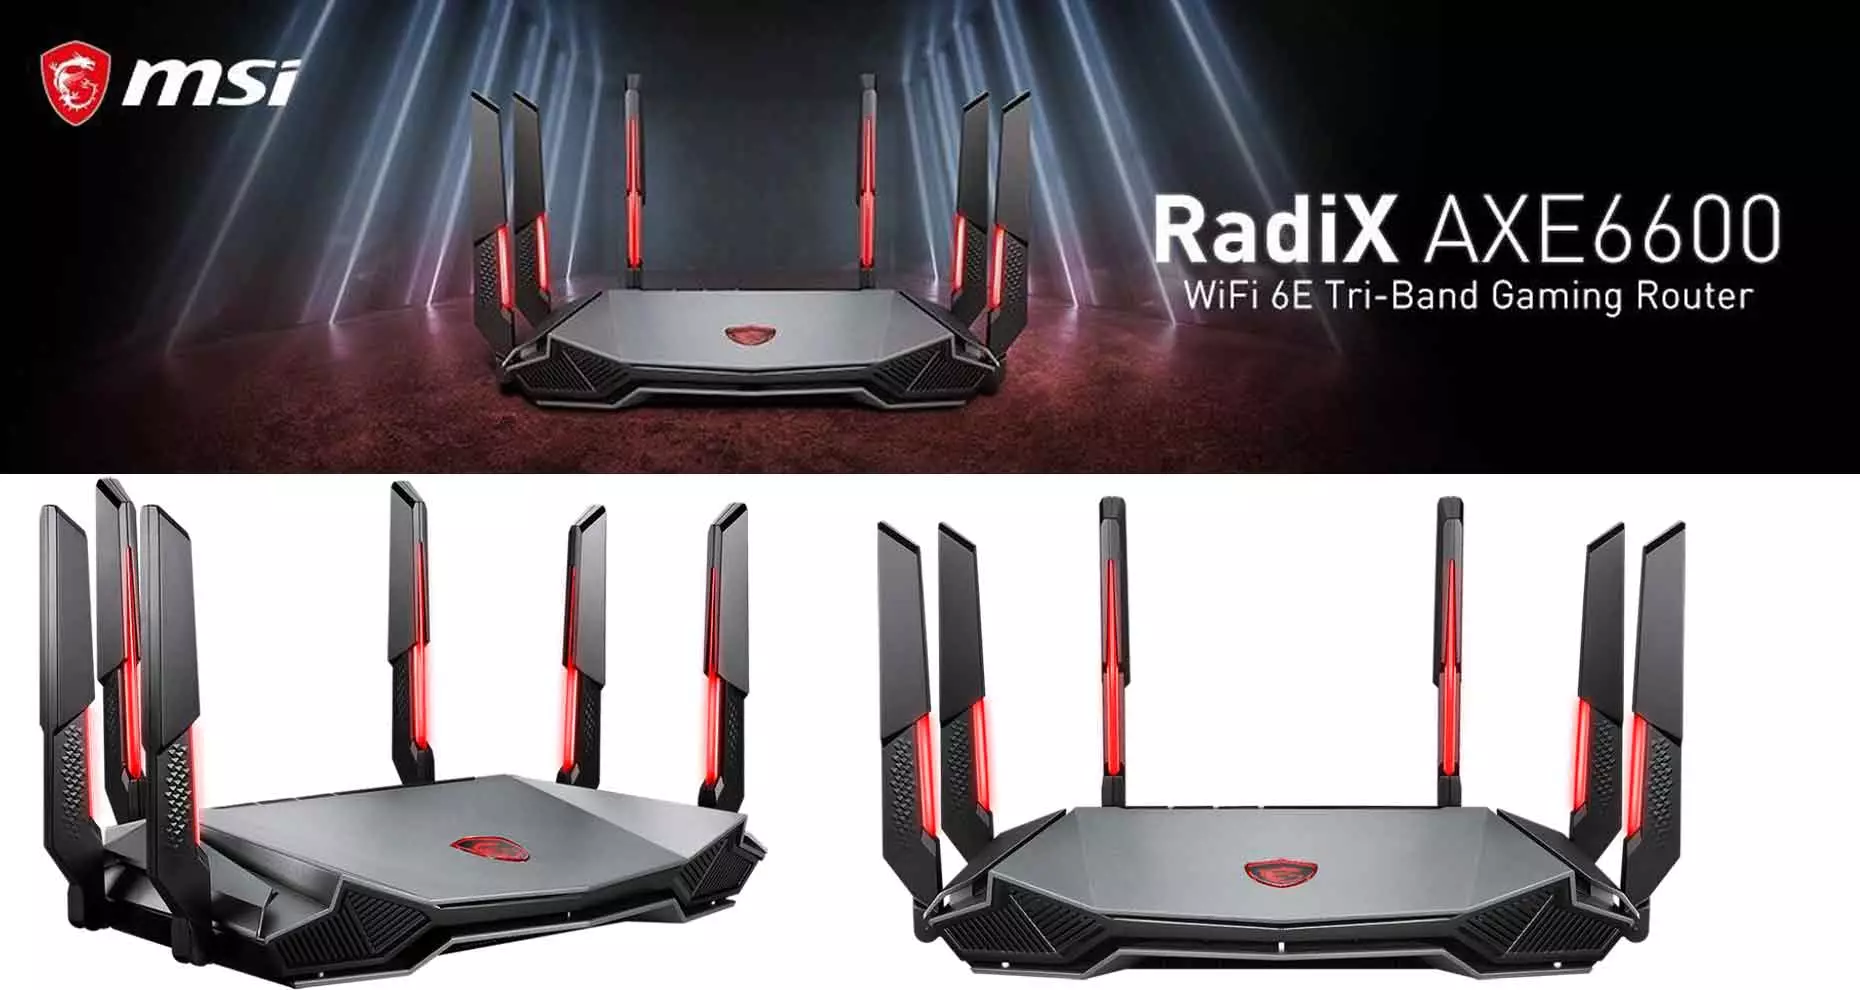 Routeur gaming tribande MSI RadiX AX6600 Wi-Fi 6